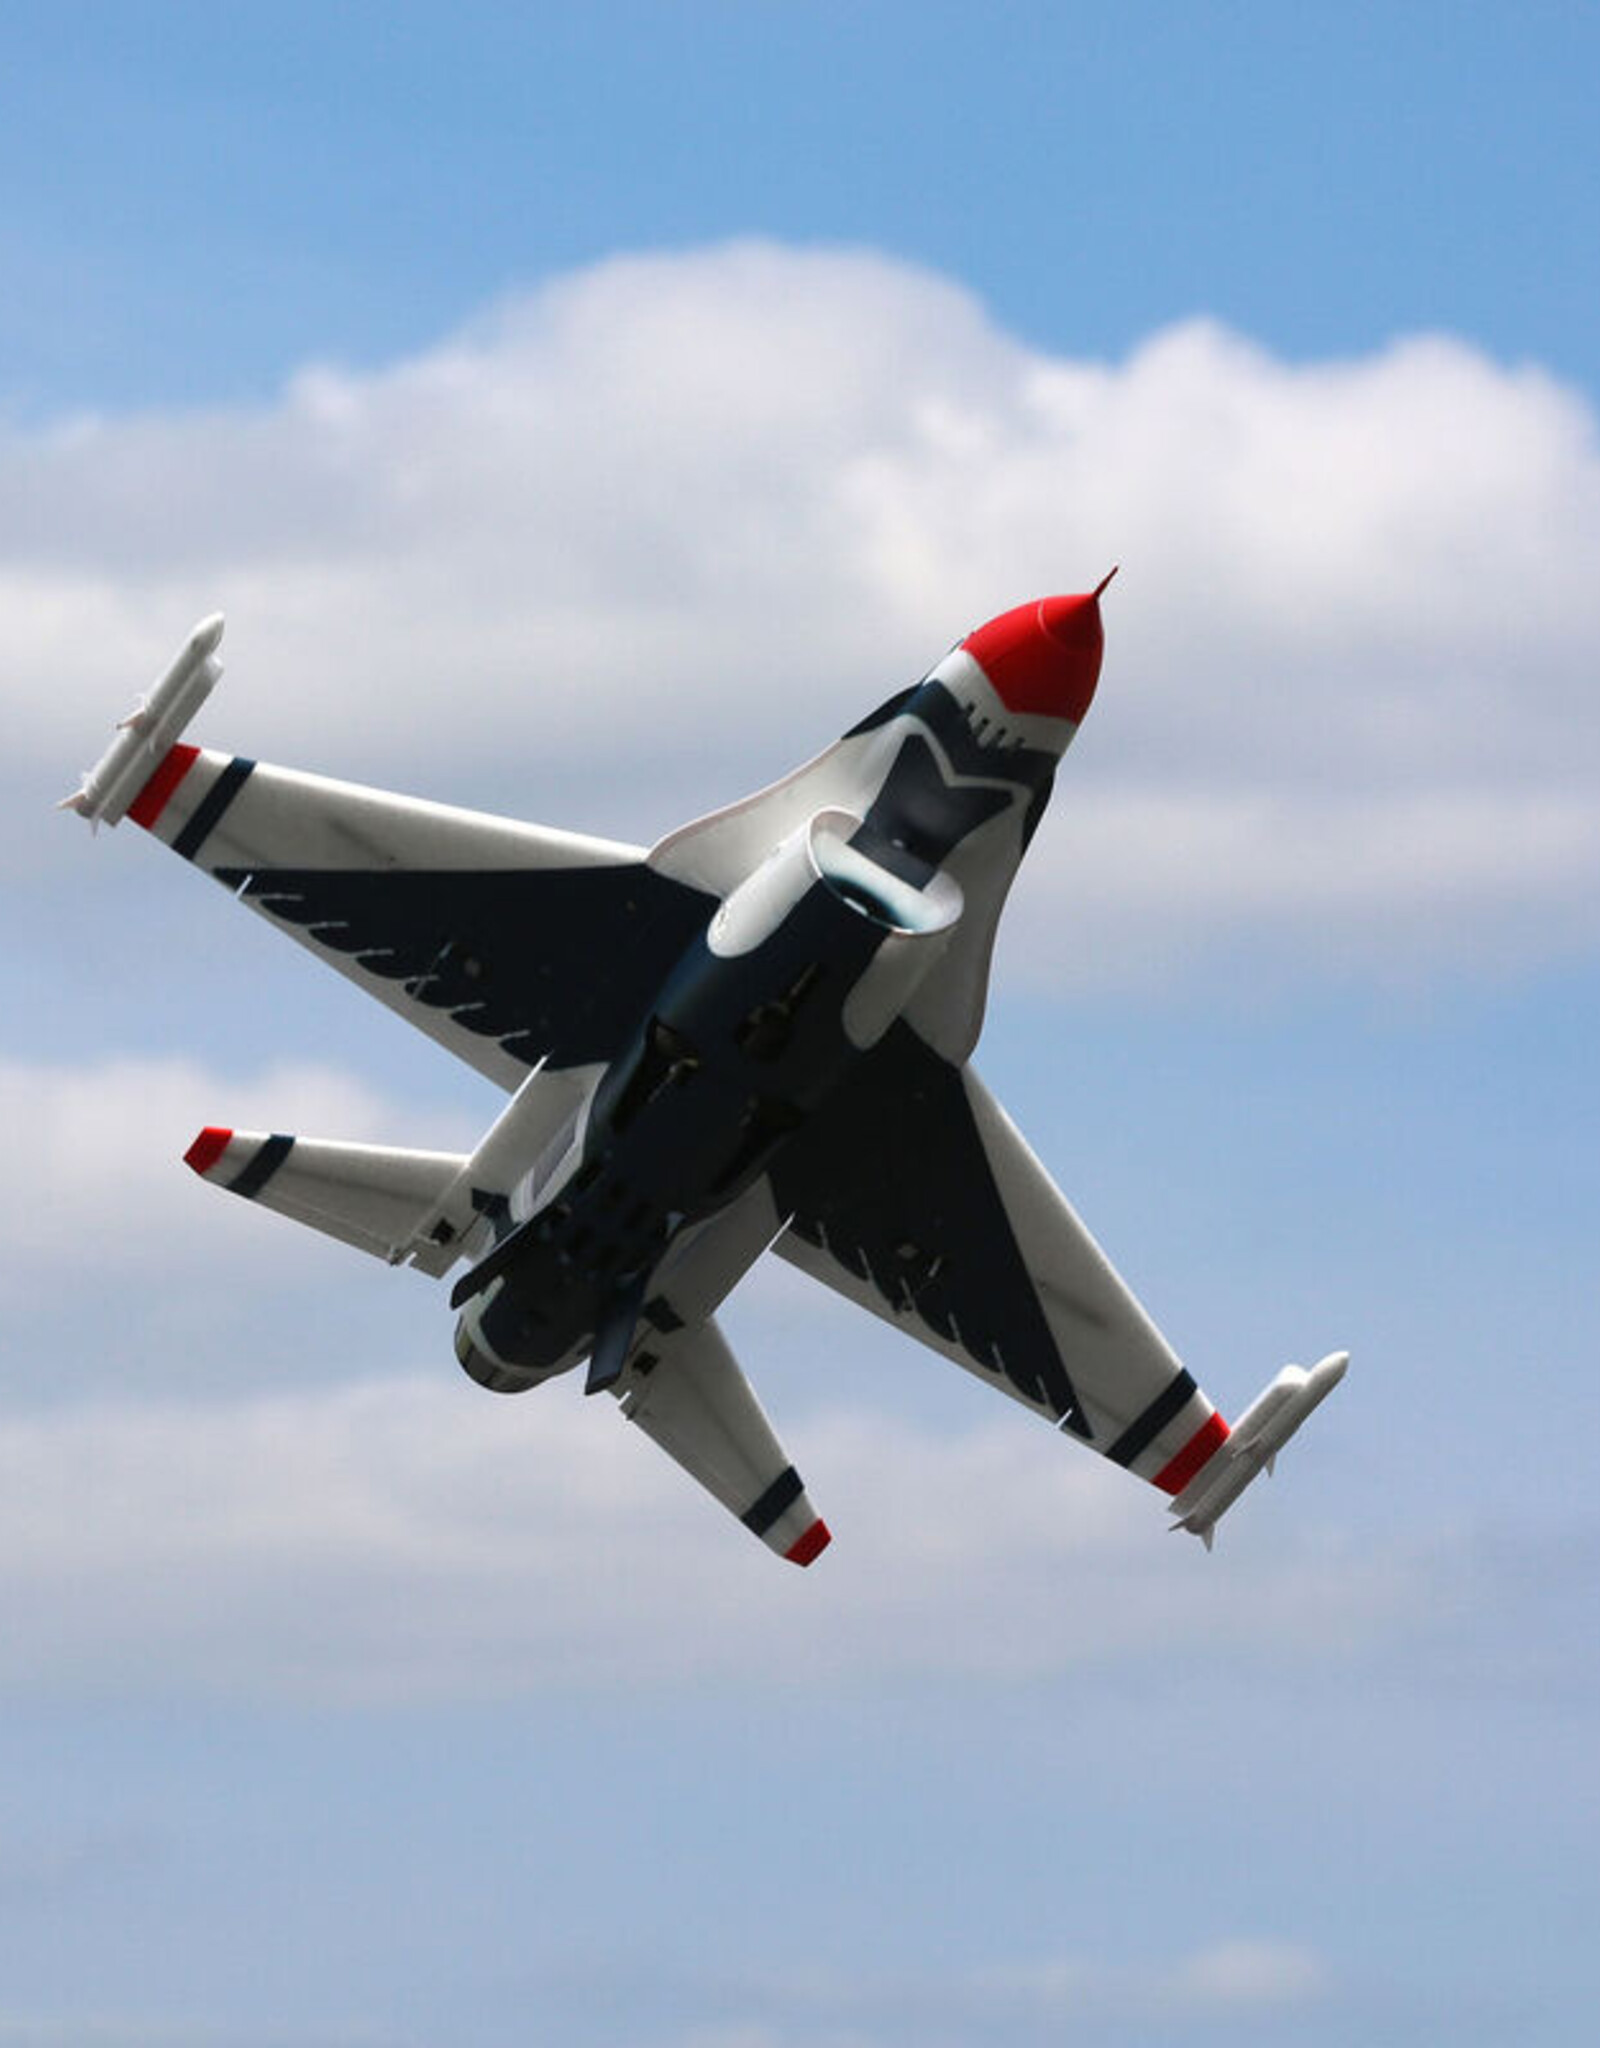 eflite EFL178500 F-16 Thunderbirds 70mm EDF Jet BNF Basic with AS3X and SAFE Select